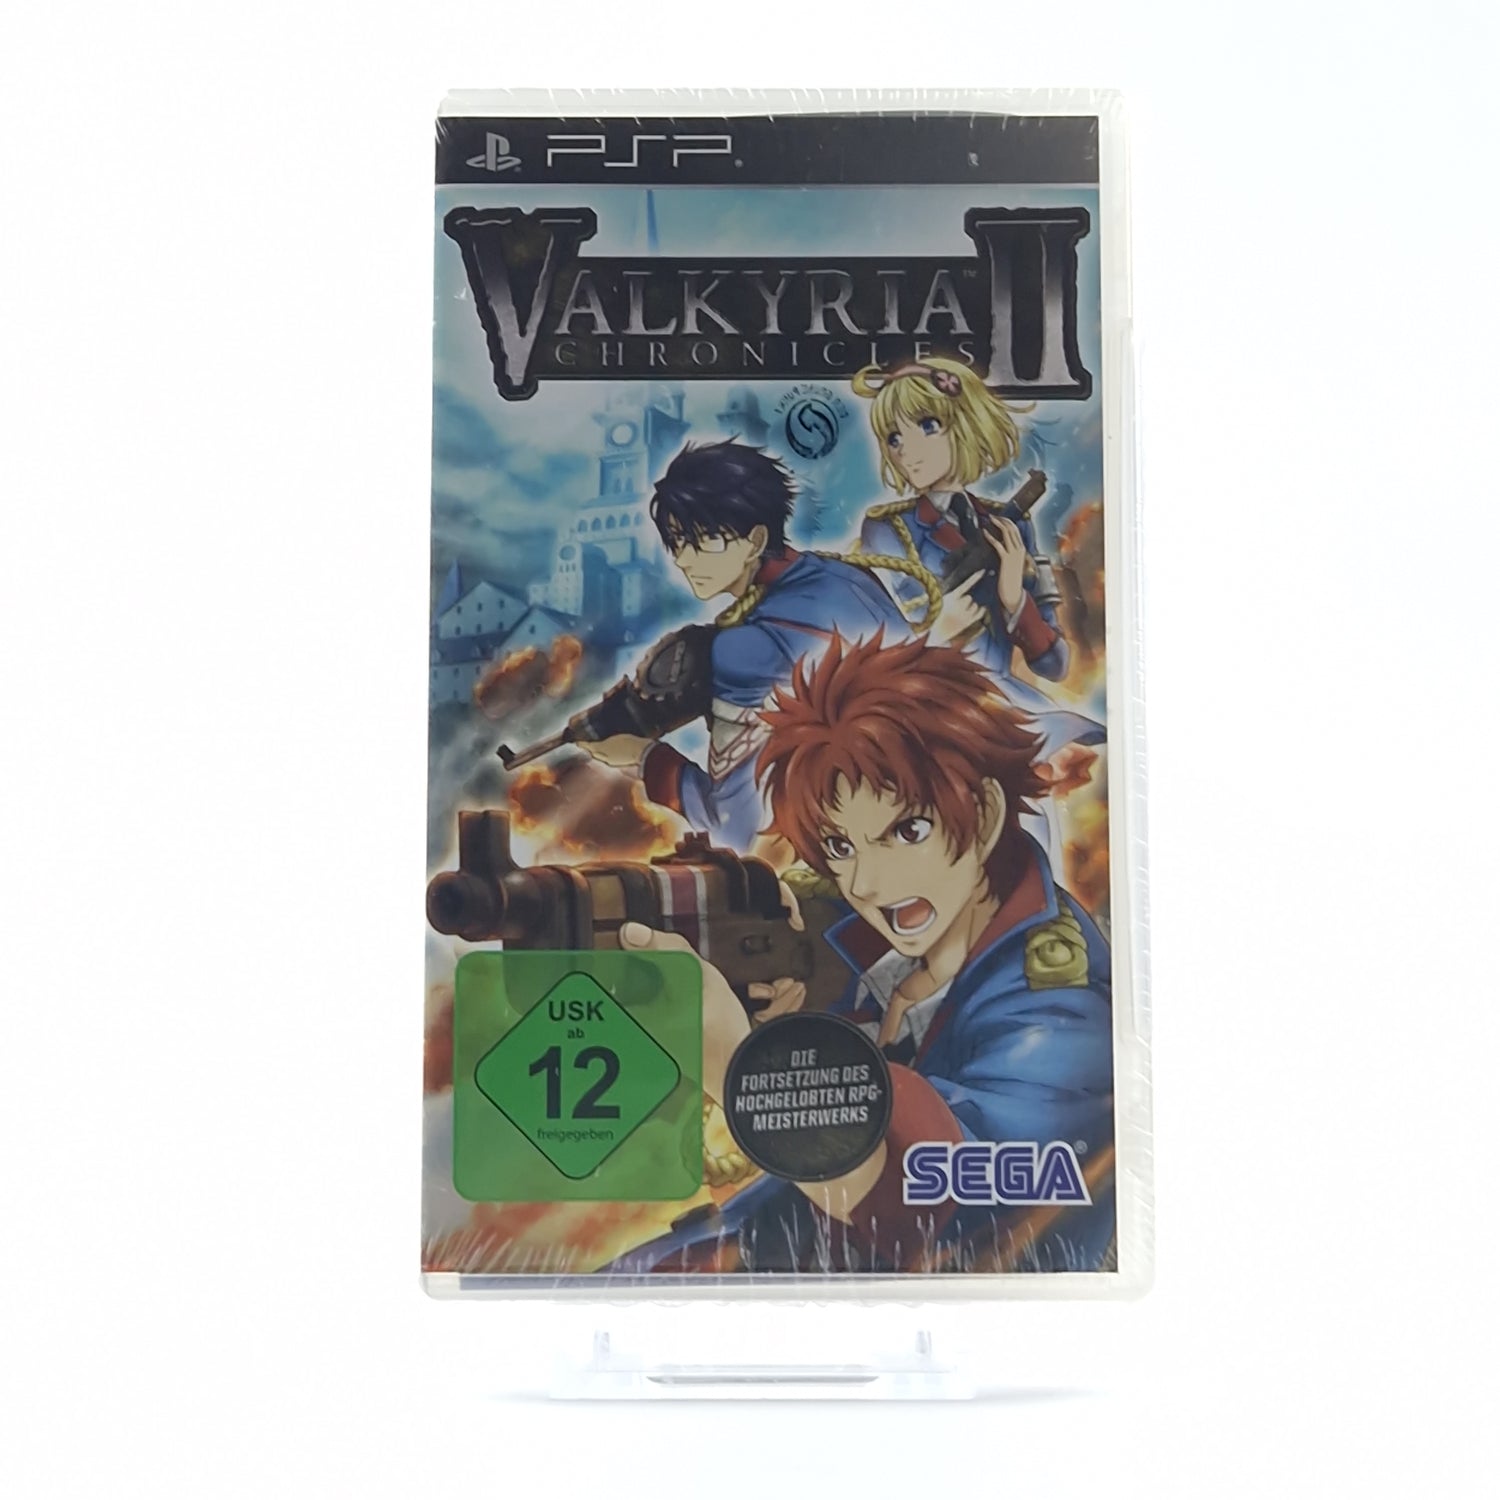 Playstation Portable Game: Valkyria Chronicles II - OVP NEW RESEALED